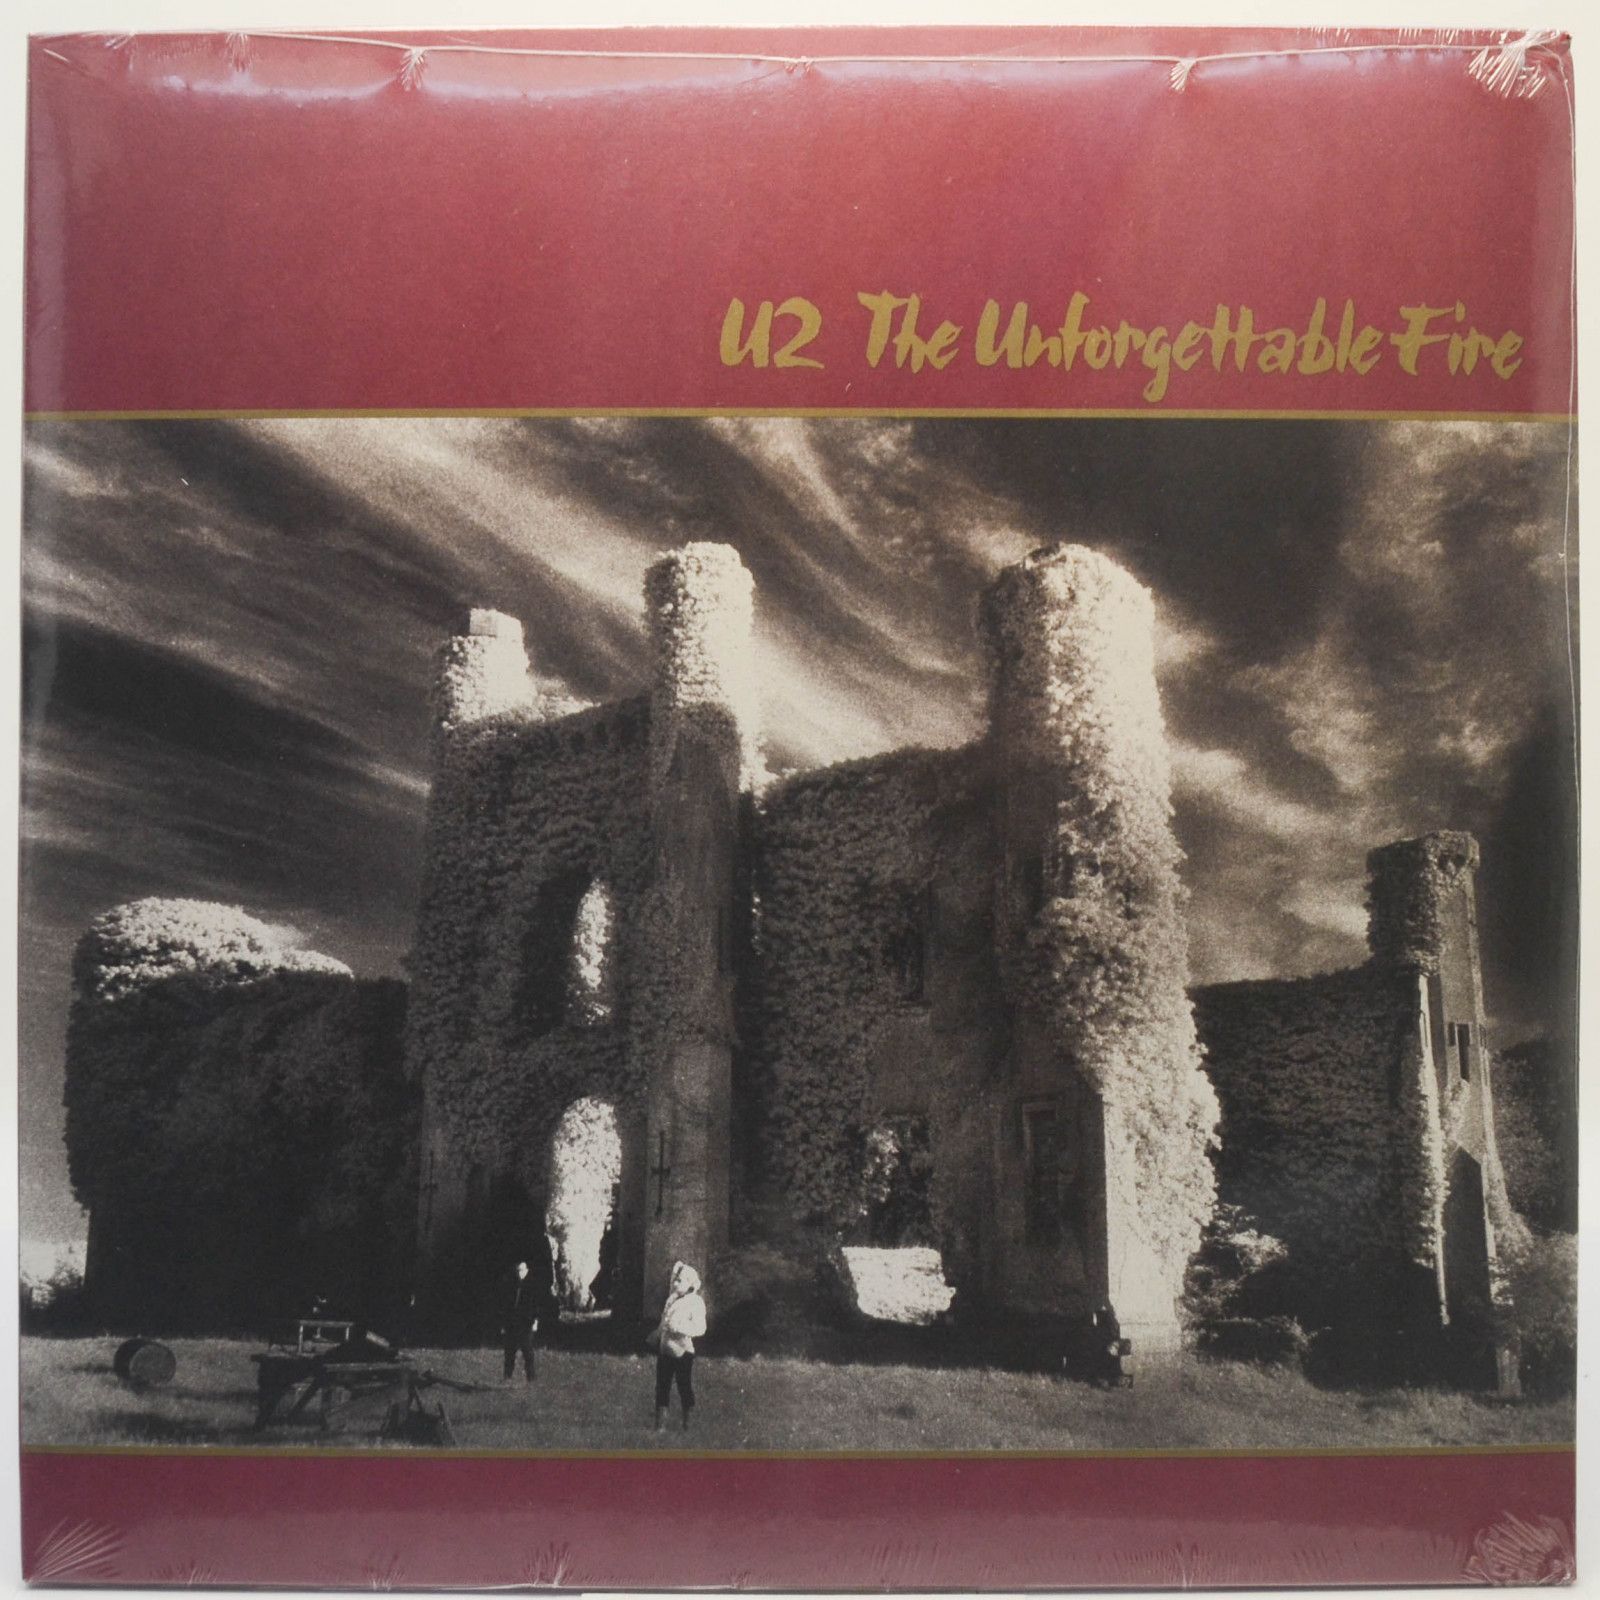 U2 — The Unforgettable Fire, 1984